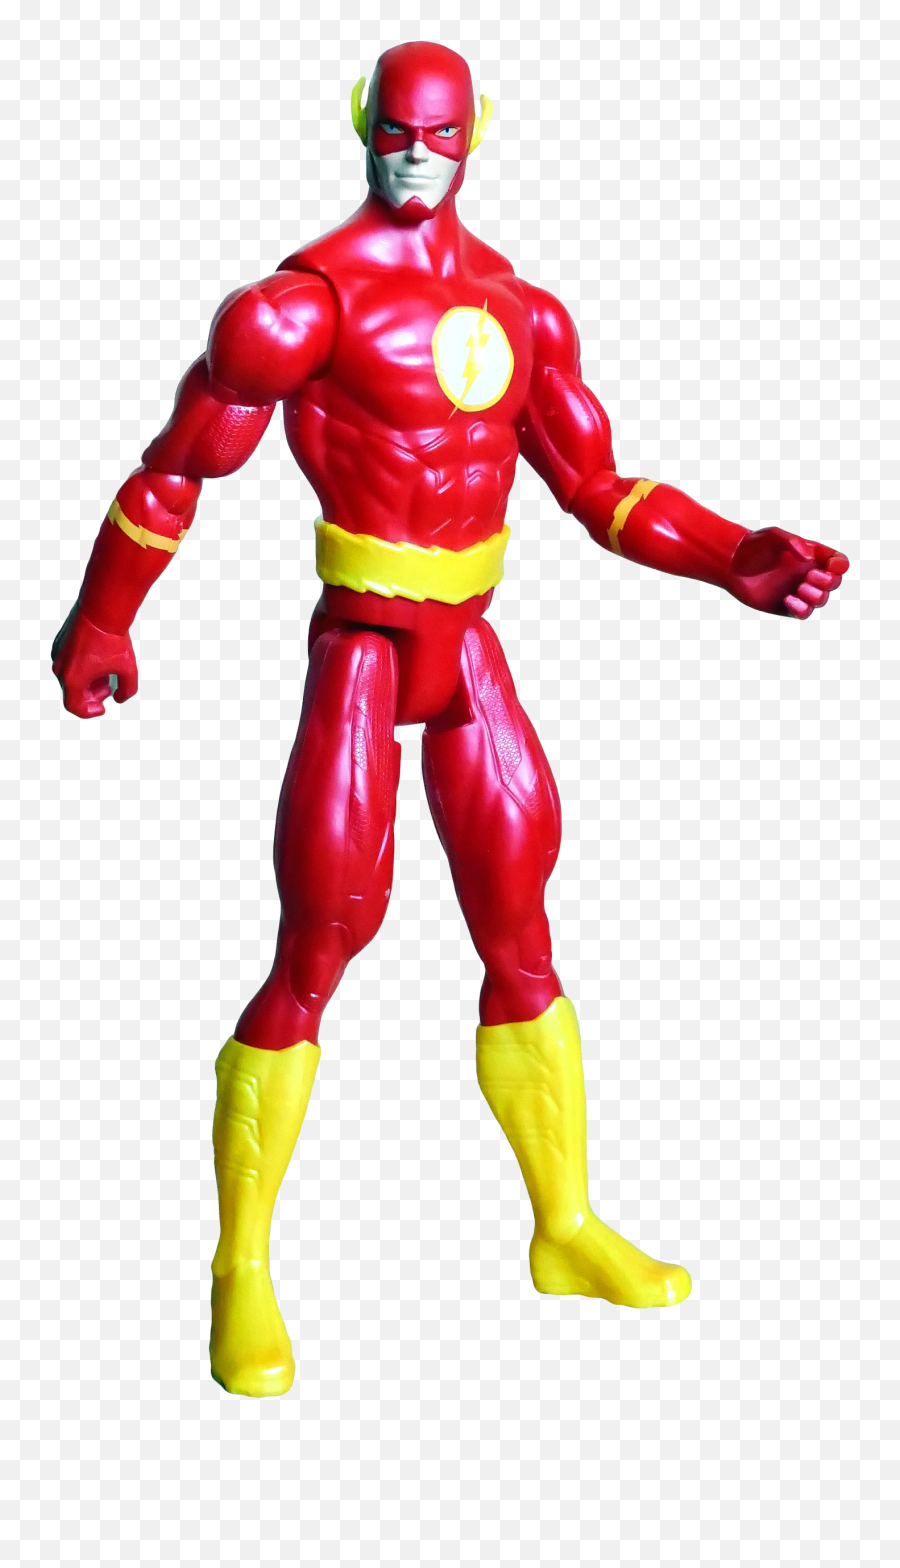 Hero Toys Png Transparent Image - Superhero Toy Png,Toys Png